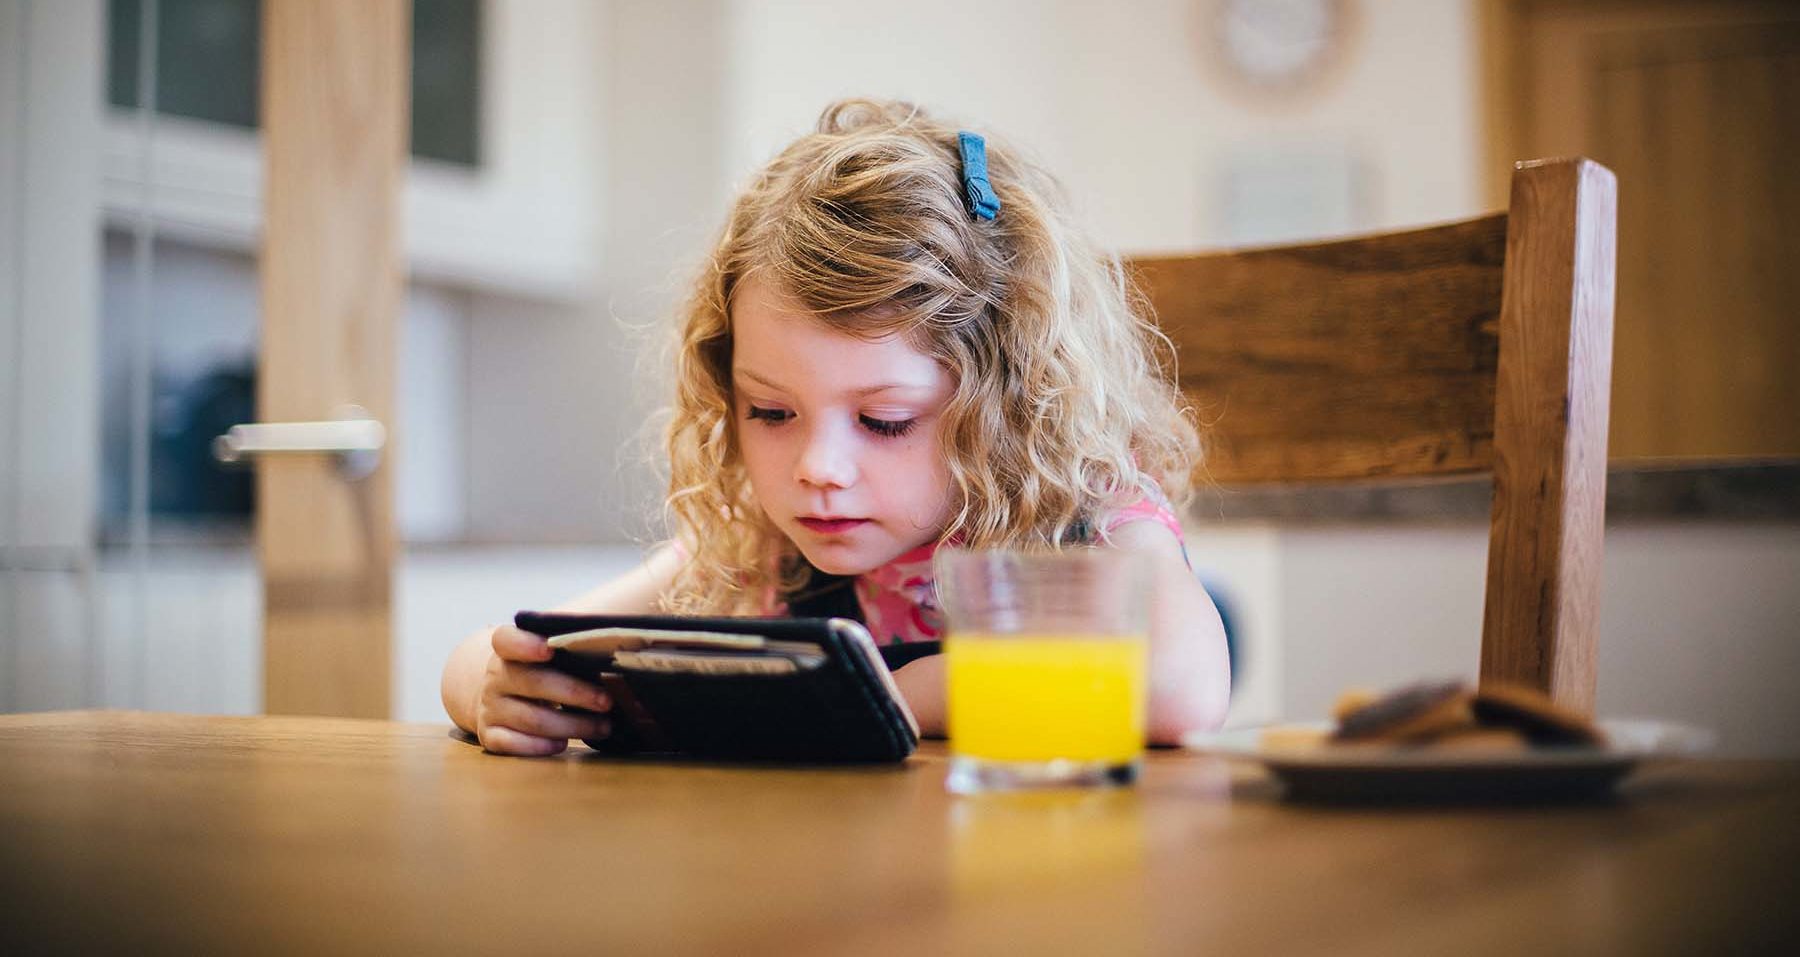 Little blond girl watches smartphone while eating cookies.